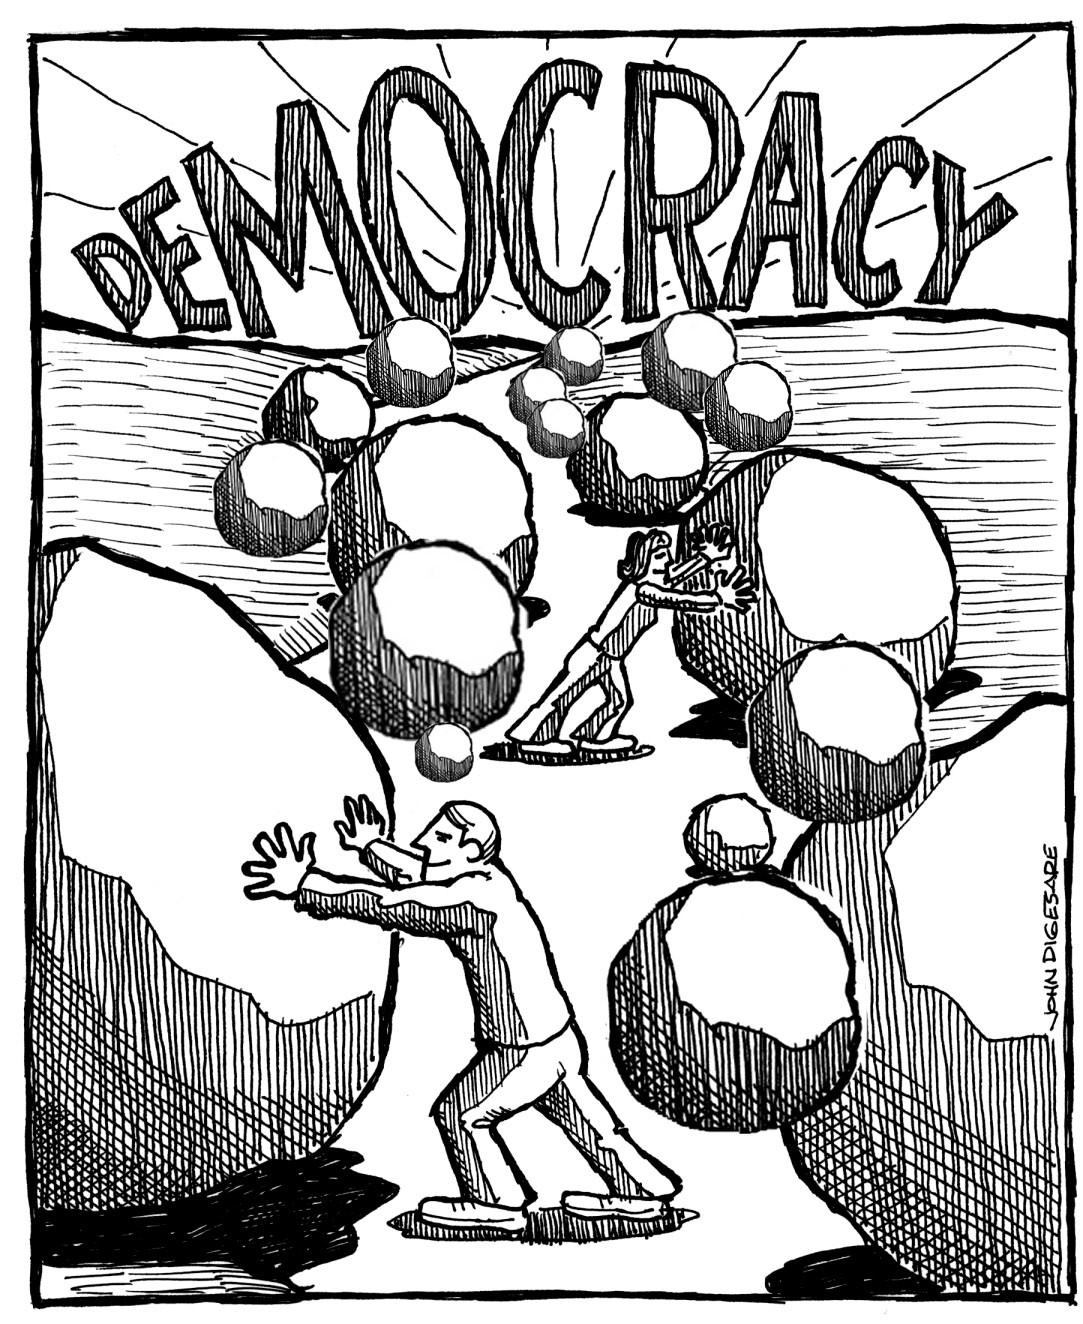 If you will it, it will come: I Have a Great Idea - Democracy 101